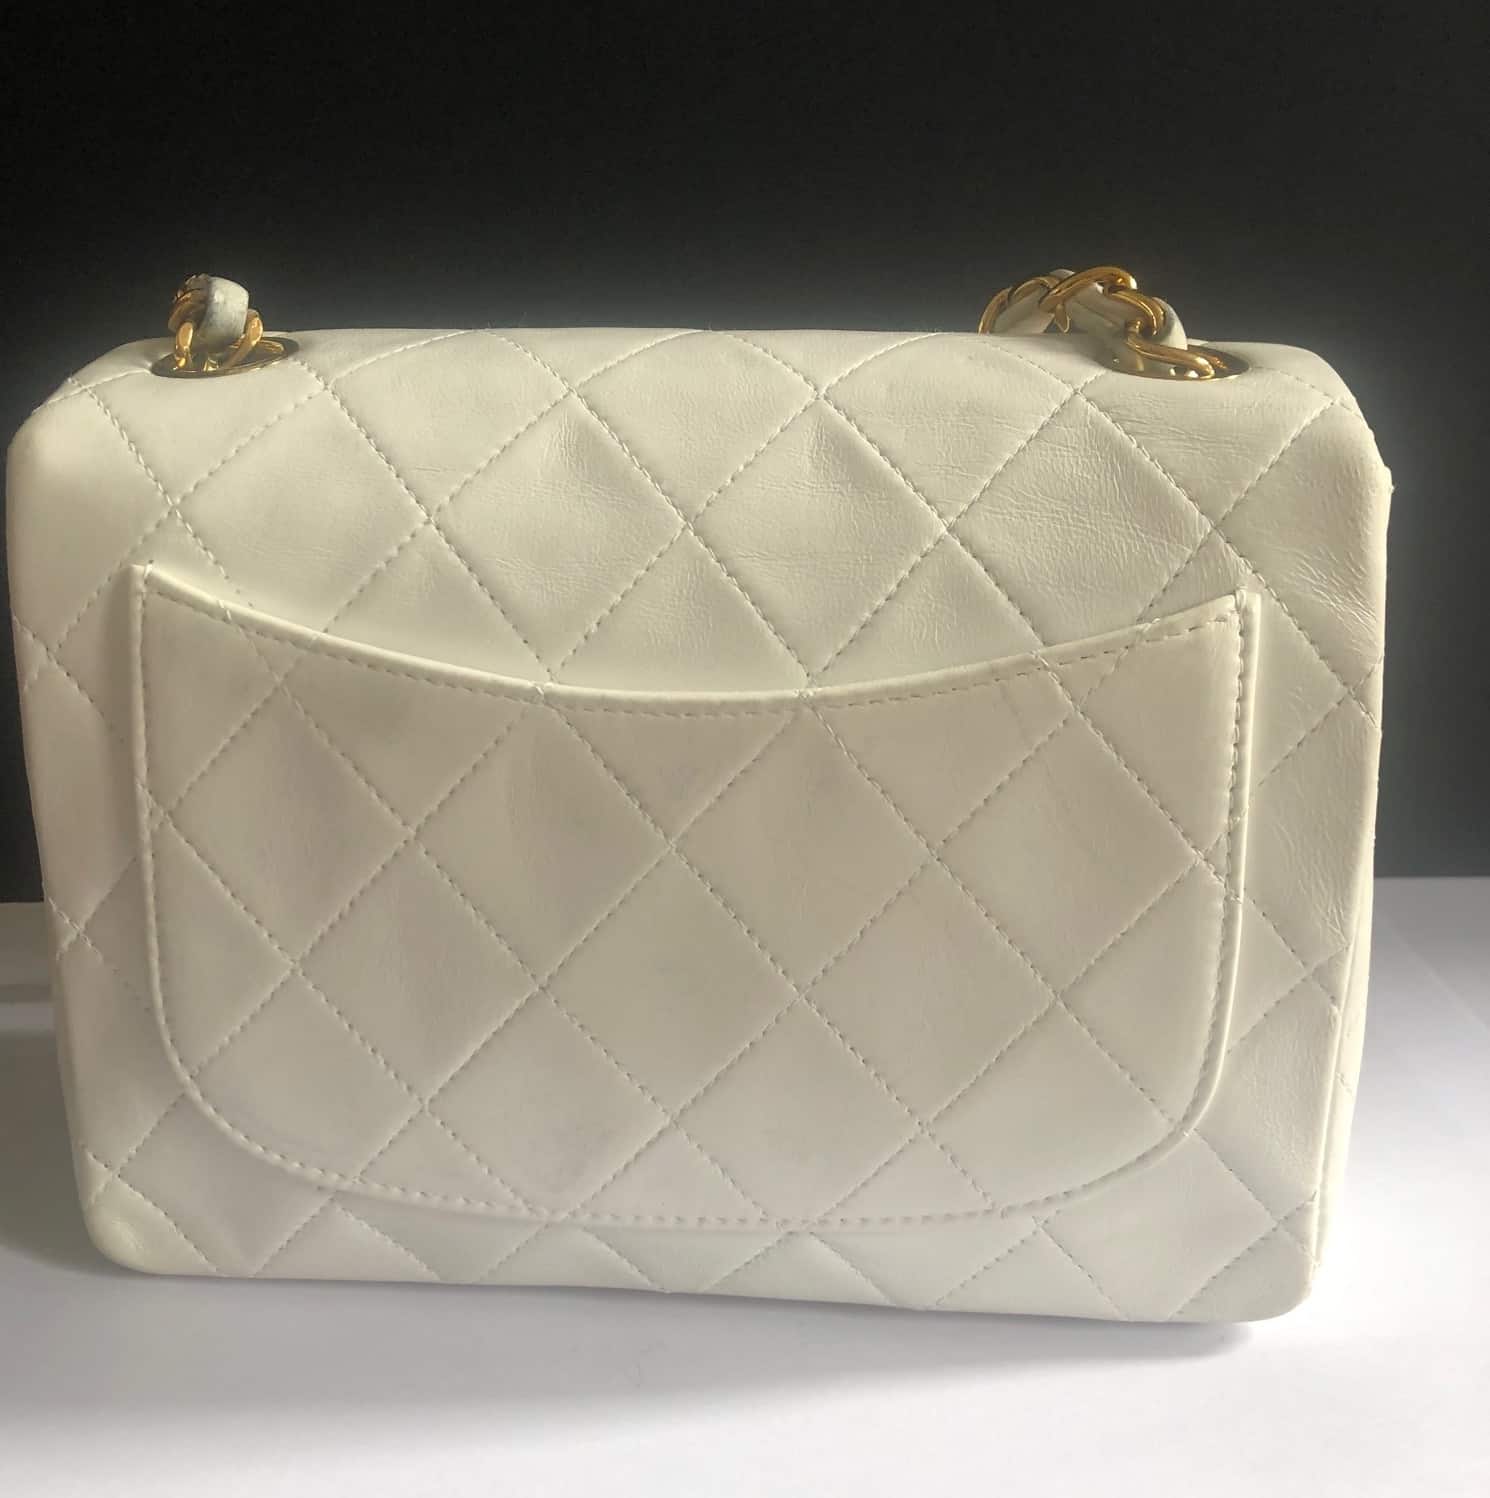 CHANEL 1997 White Lambskin Mini Square Quilted Classic Vintage Flap Bag W/ Box